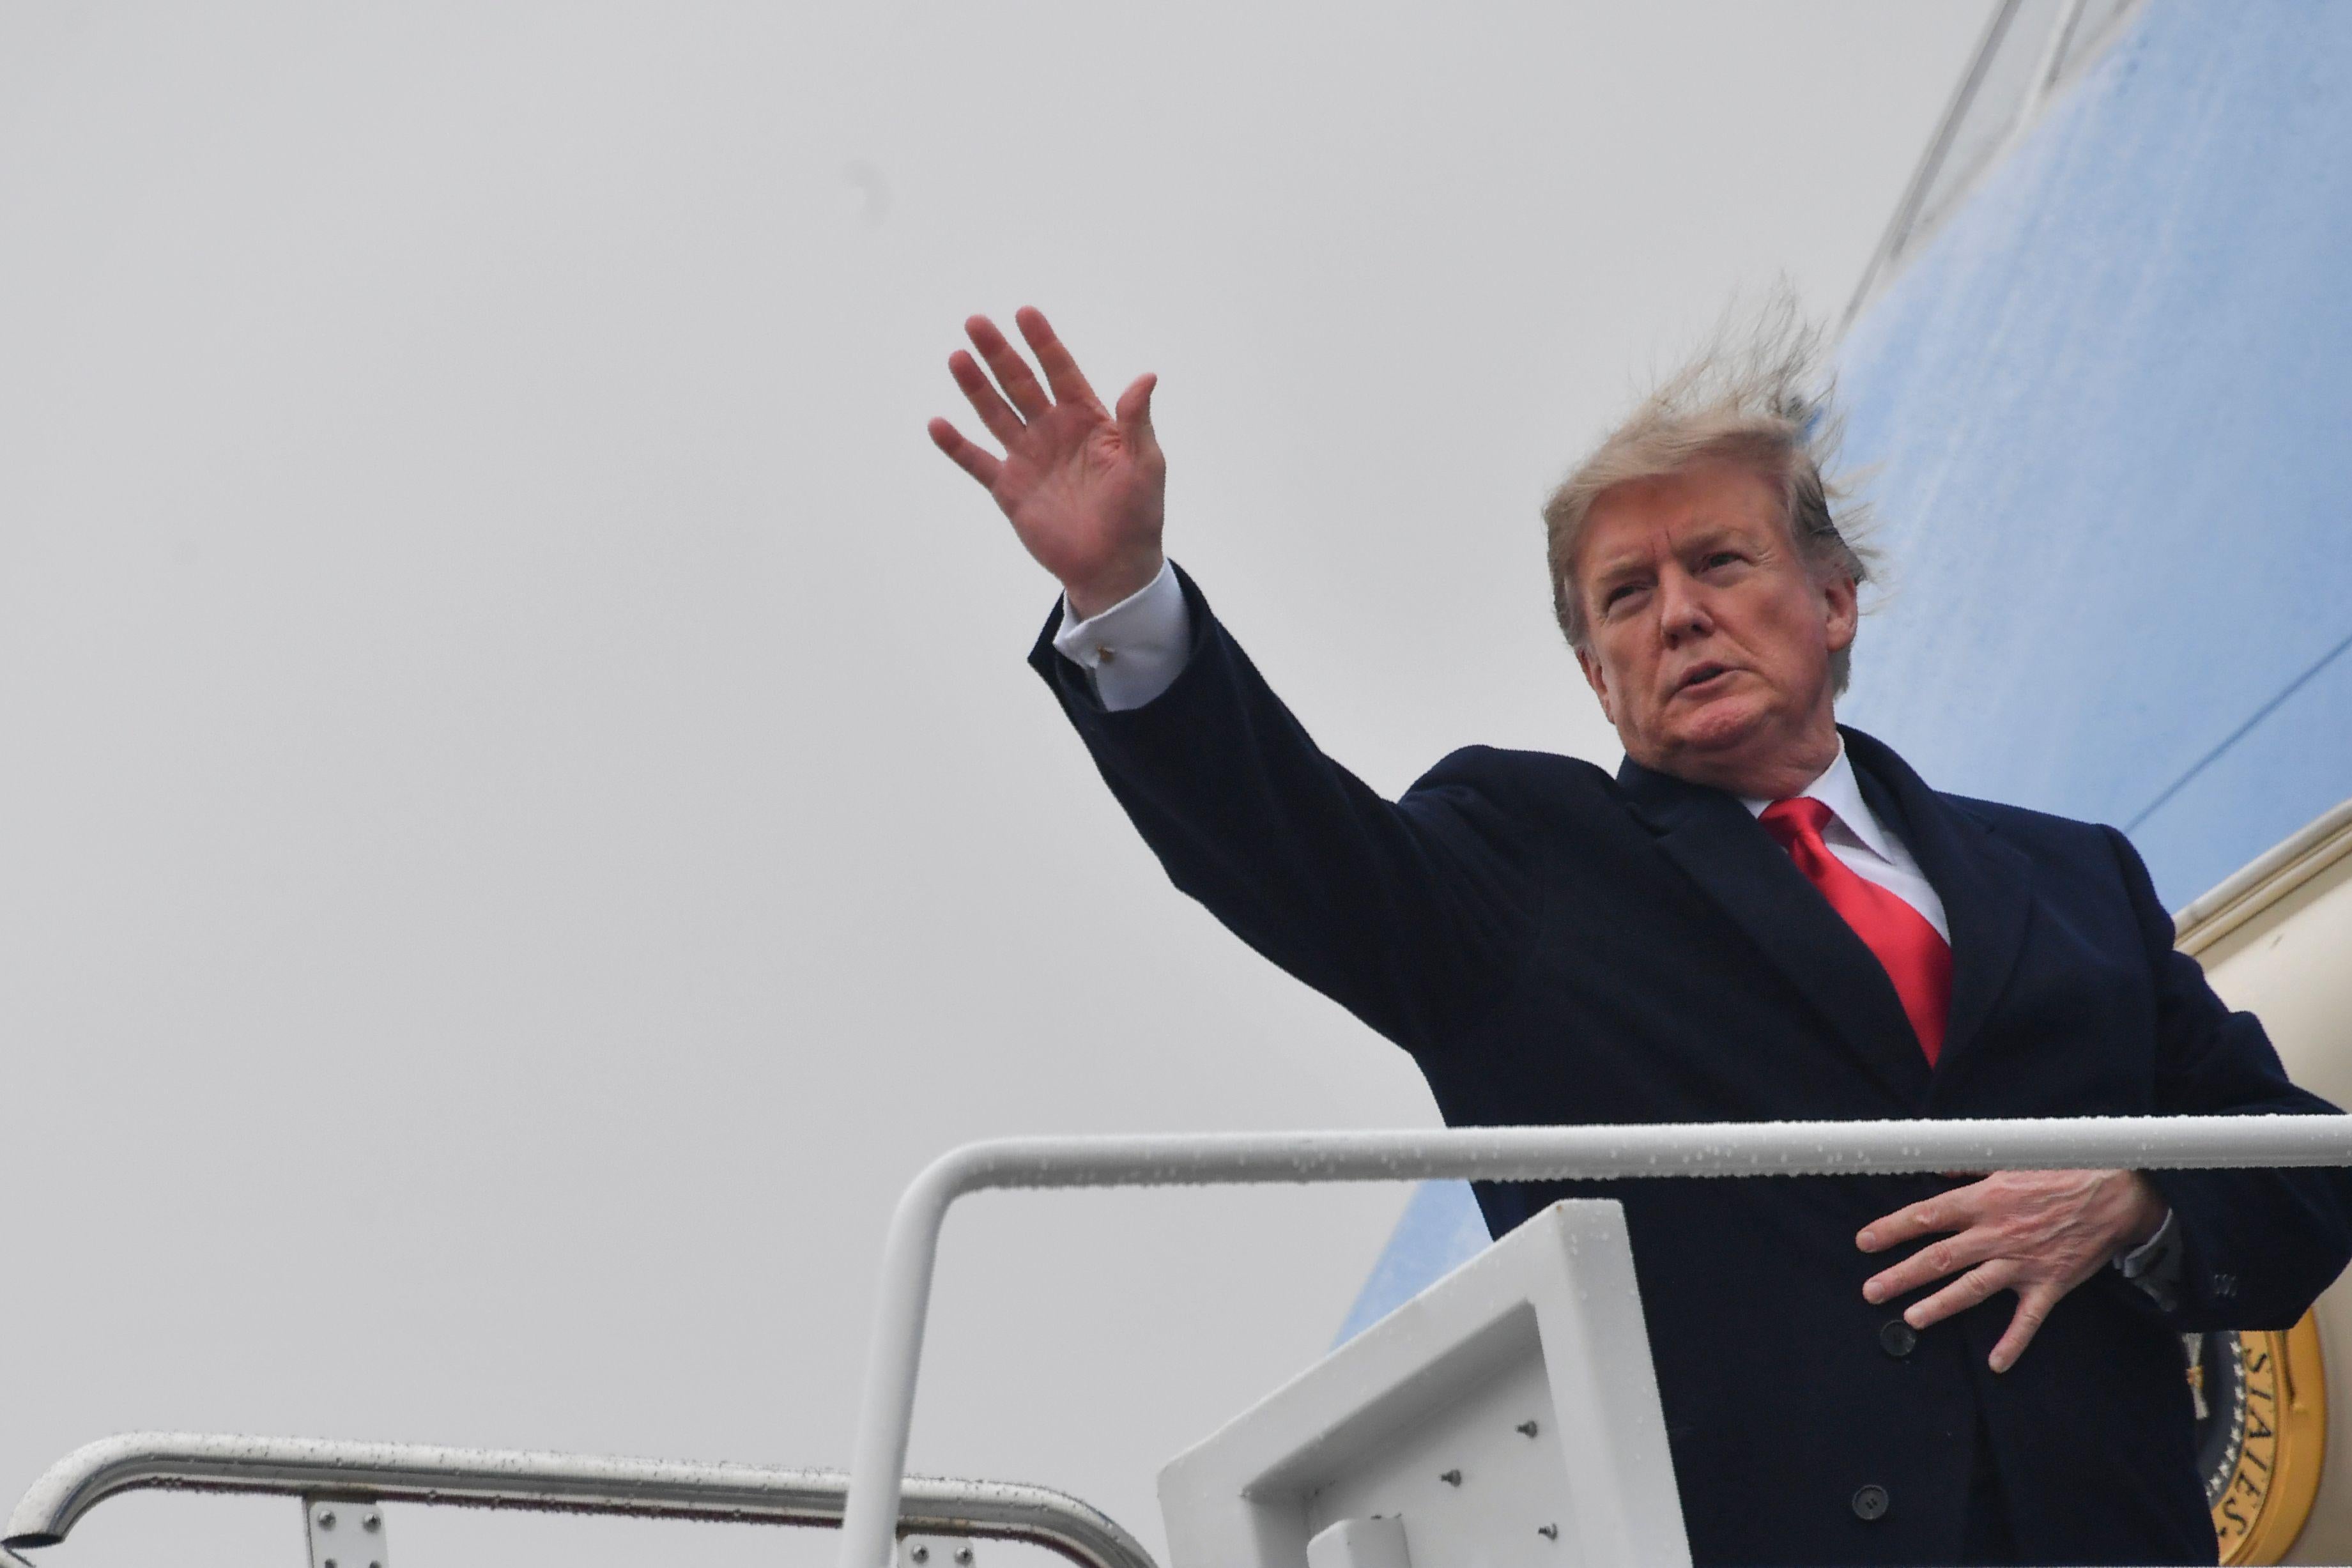 President Trump waves as he boards Air Force One.